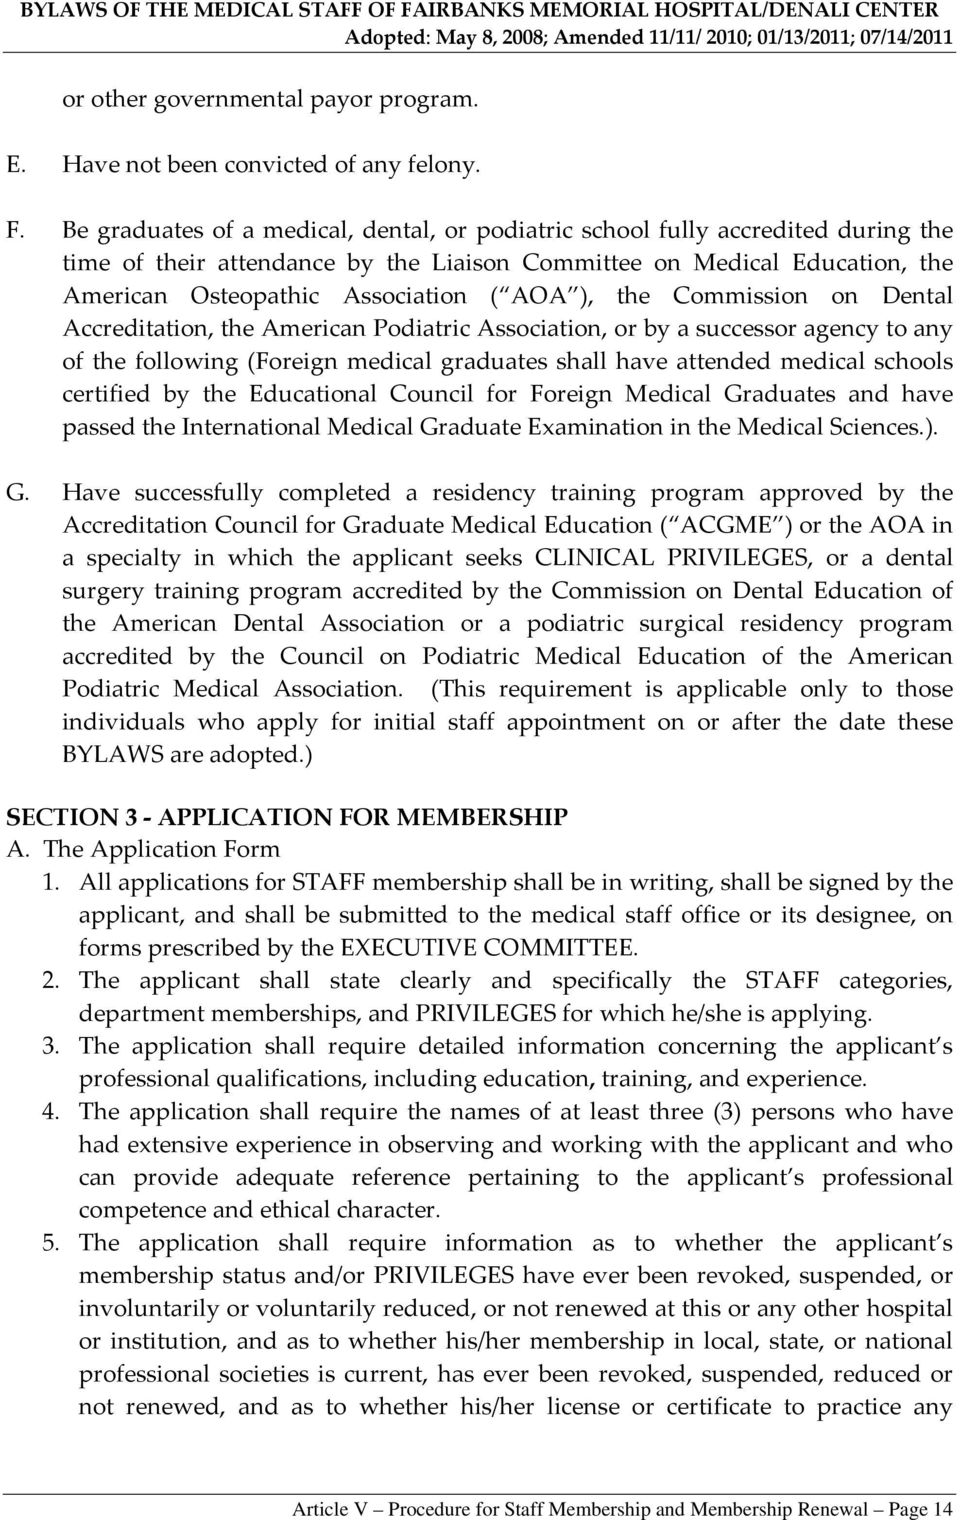 ), the Commission on Dental Accreditation, the American Podiatric Association, or by a successor agency to any of the following (Foreign medical graduates shall have attended medical schools